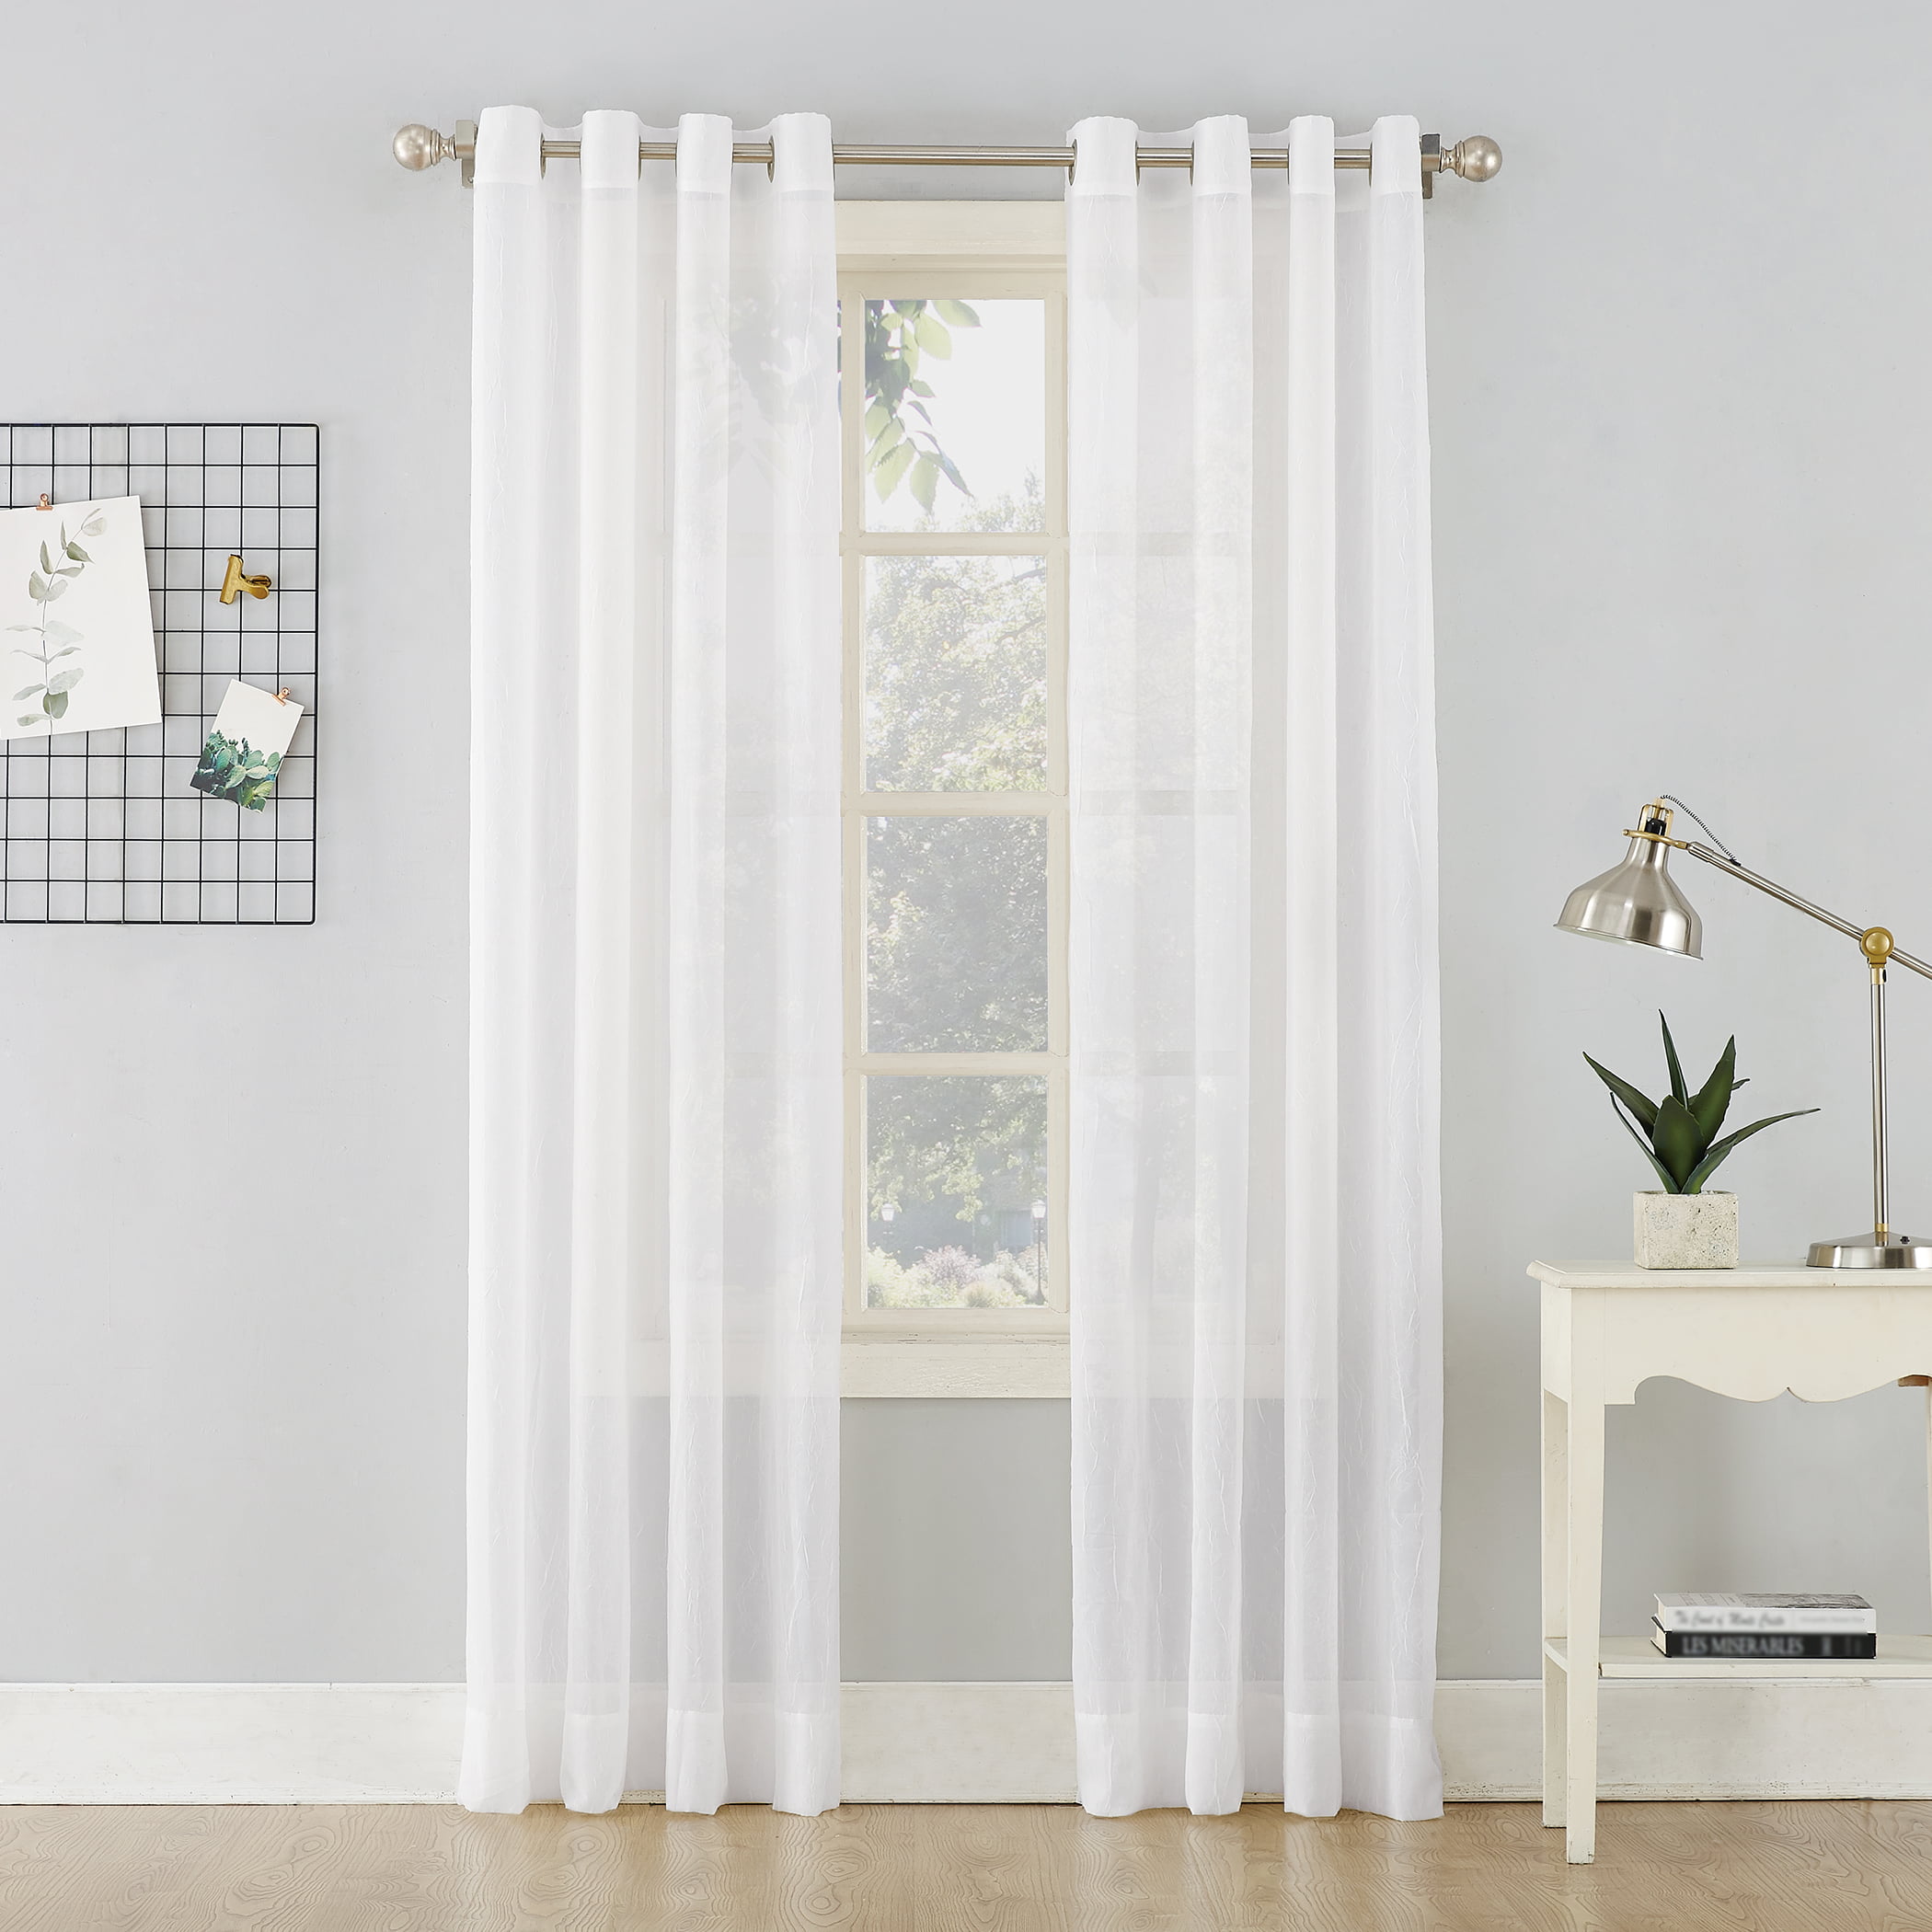 No. 918 Erica Crushed Sheer Voile Grommet Curtain Panel, 51